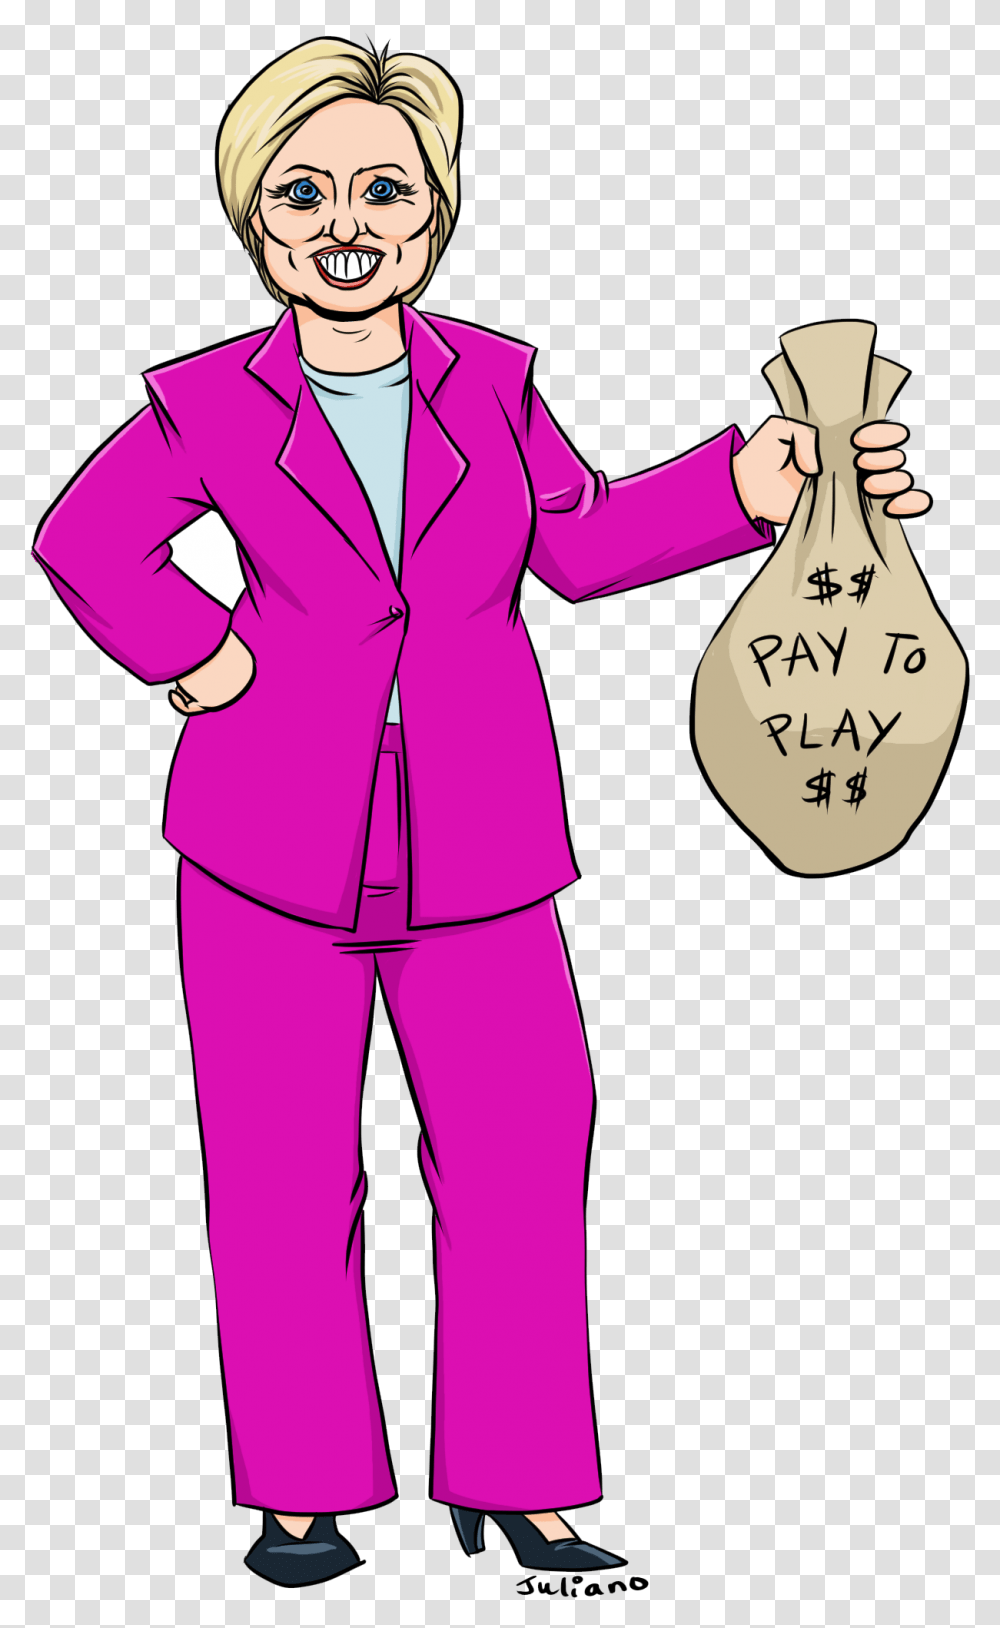 Politician Clipart Clinton Trump Pay To Play, Suit, Overcoat, Long Sleeve Transparent Png